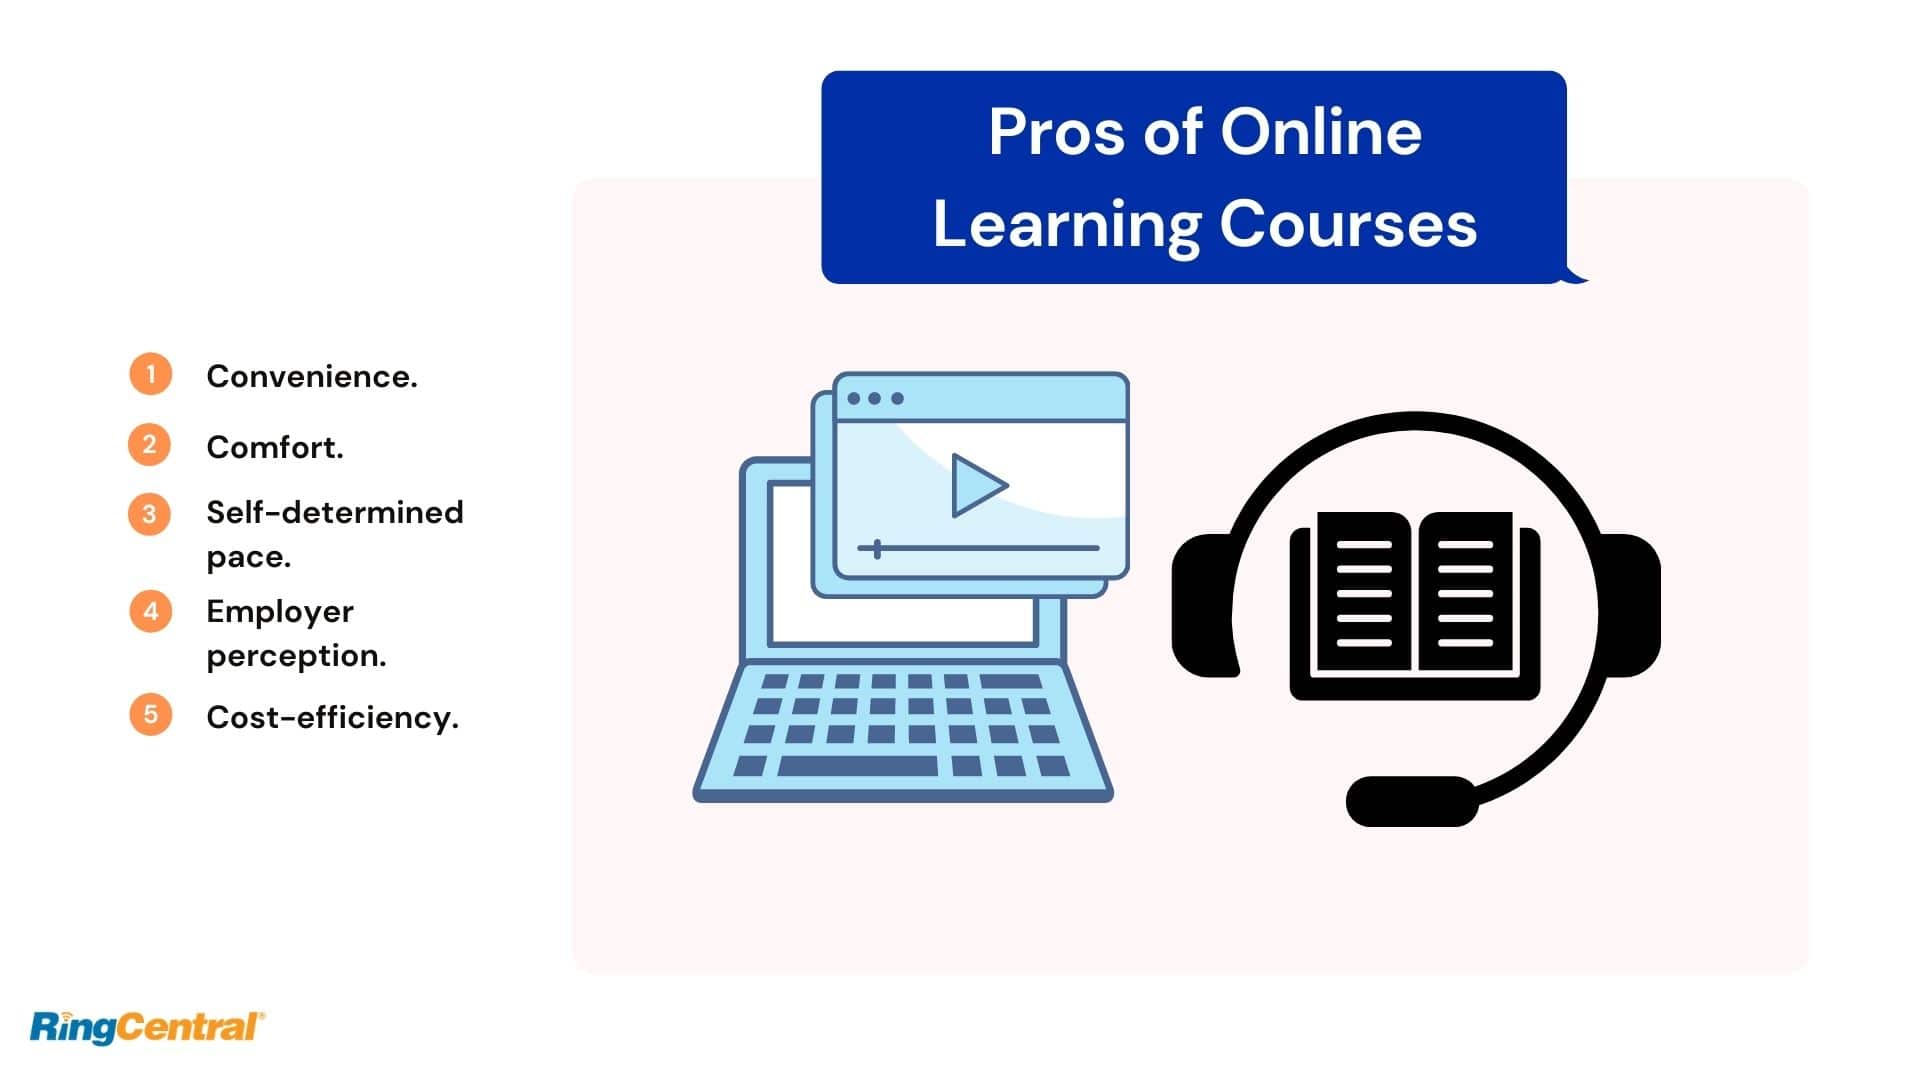 Pros of Online Learning Courses